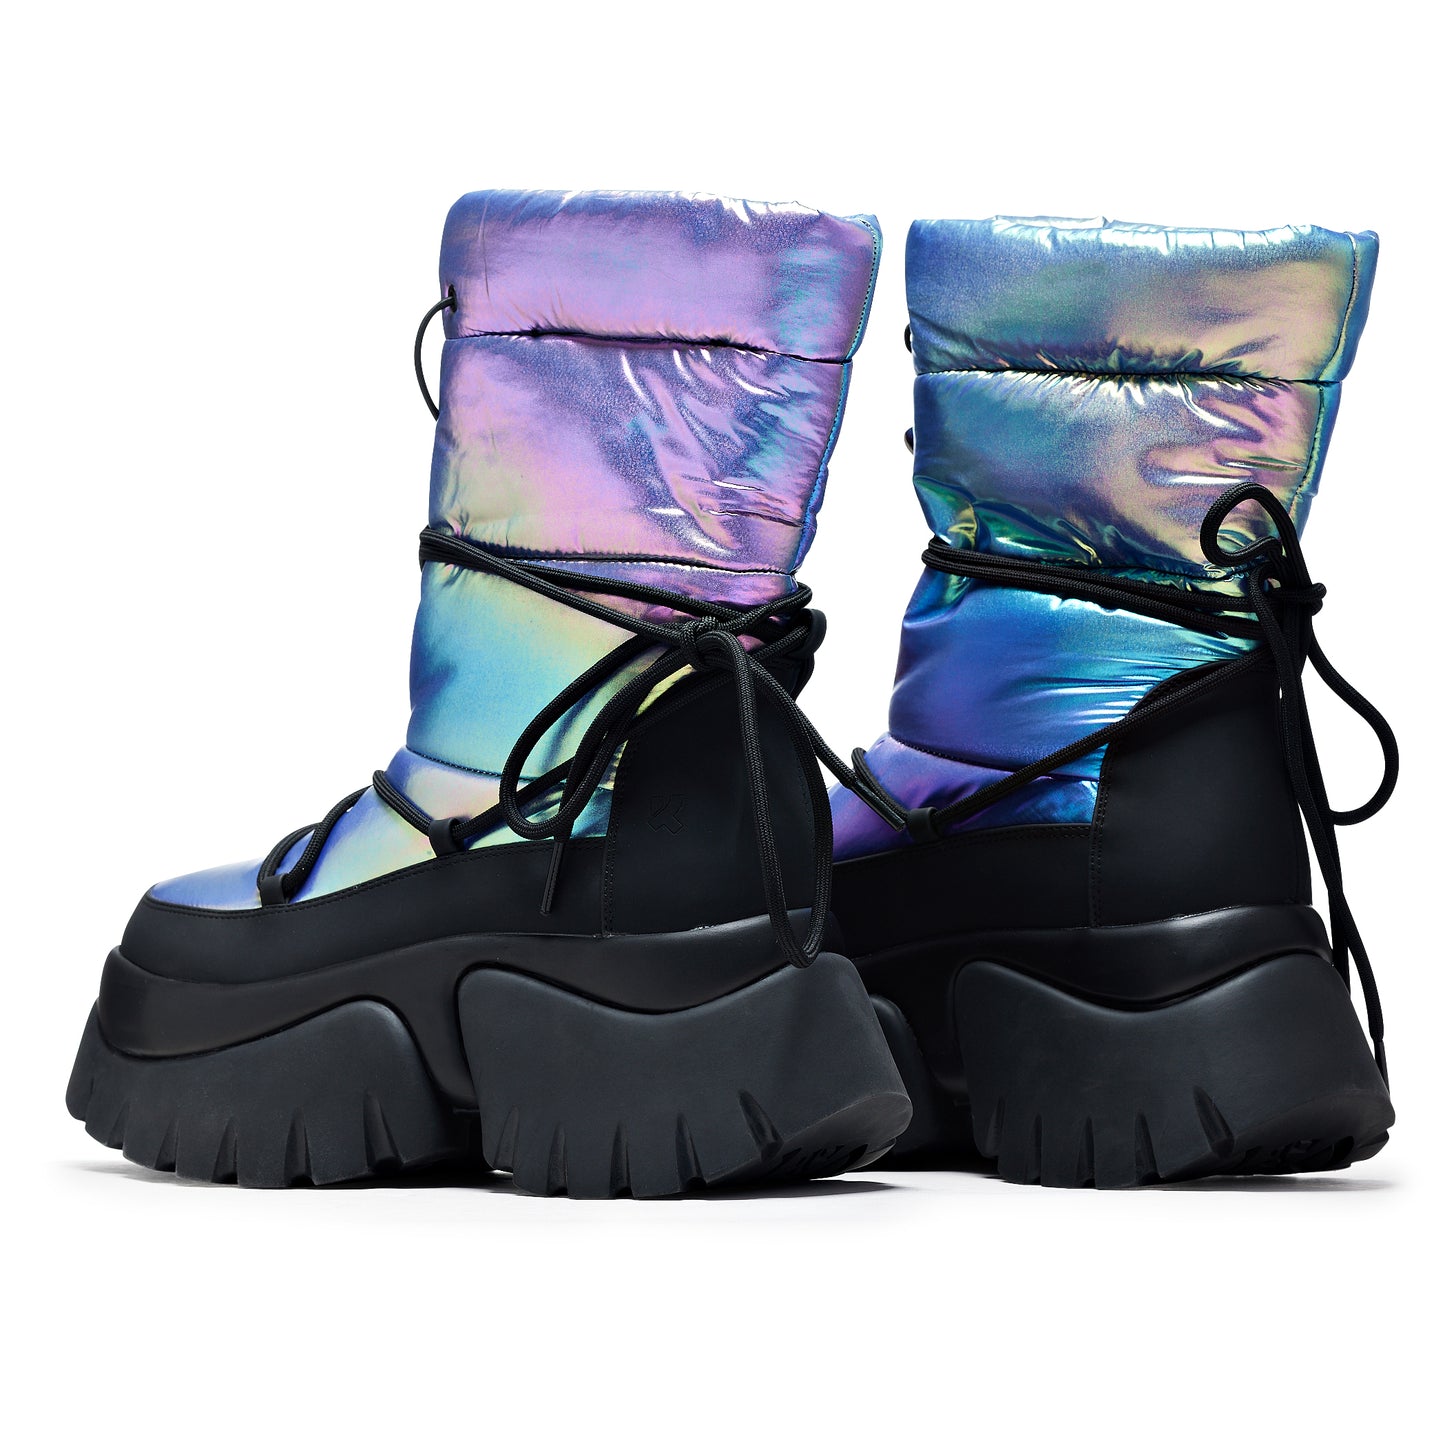 A Glass Mirage Snow Boots - Rainbow - Ankle Boots - KOI Footwear - Multi - Back View